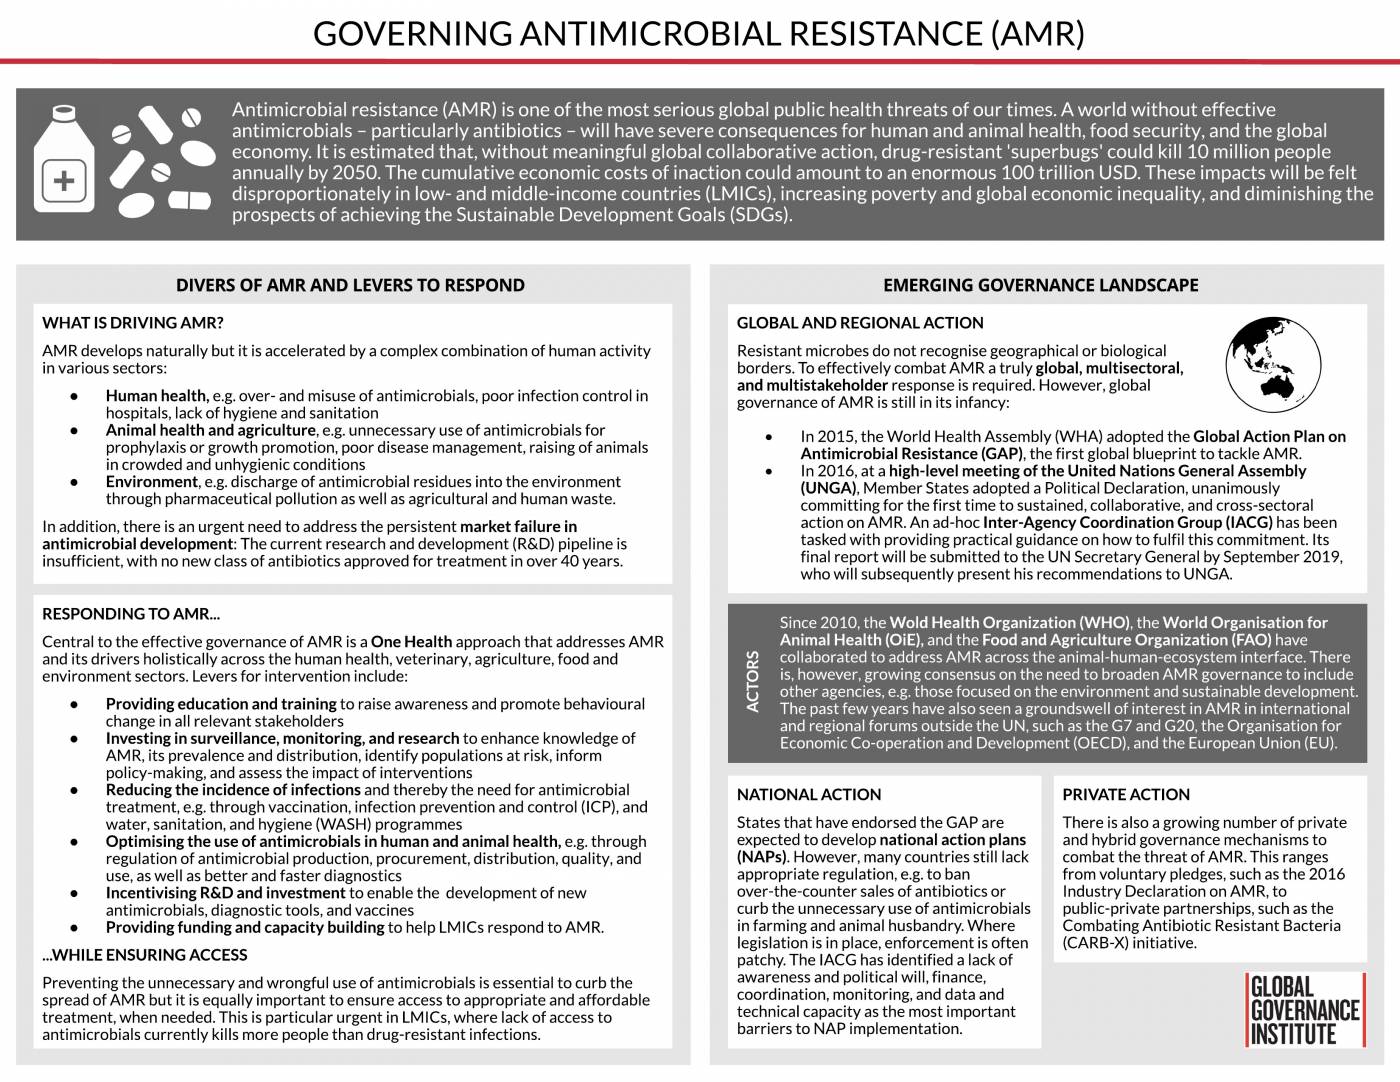 GGI Explainer - Governing Antimicrobial Resistance (AMR)